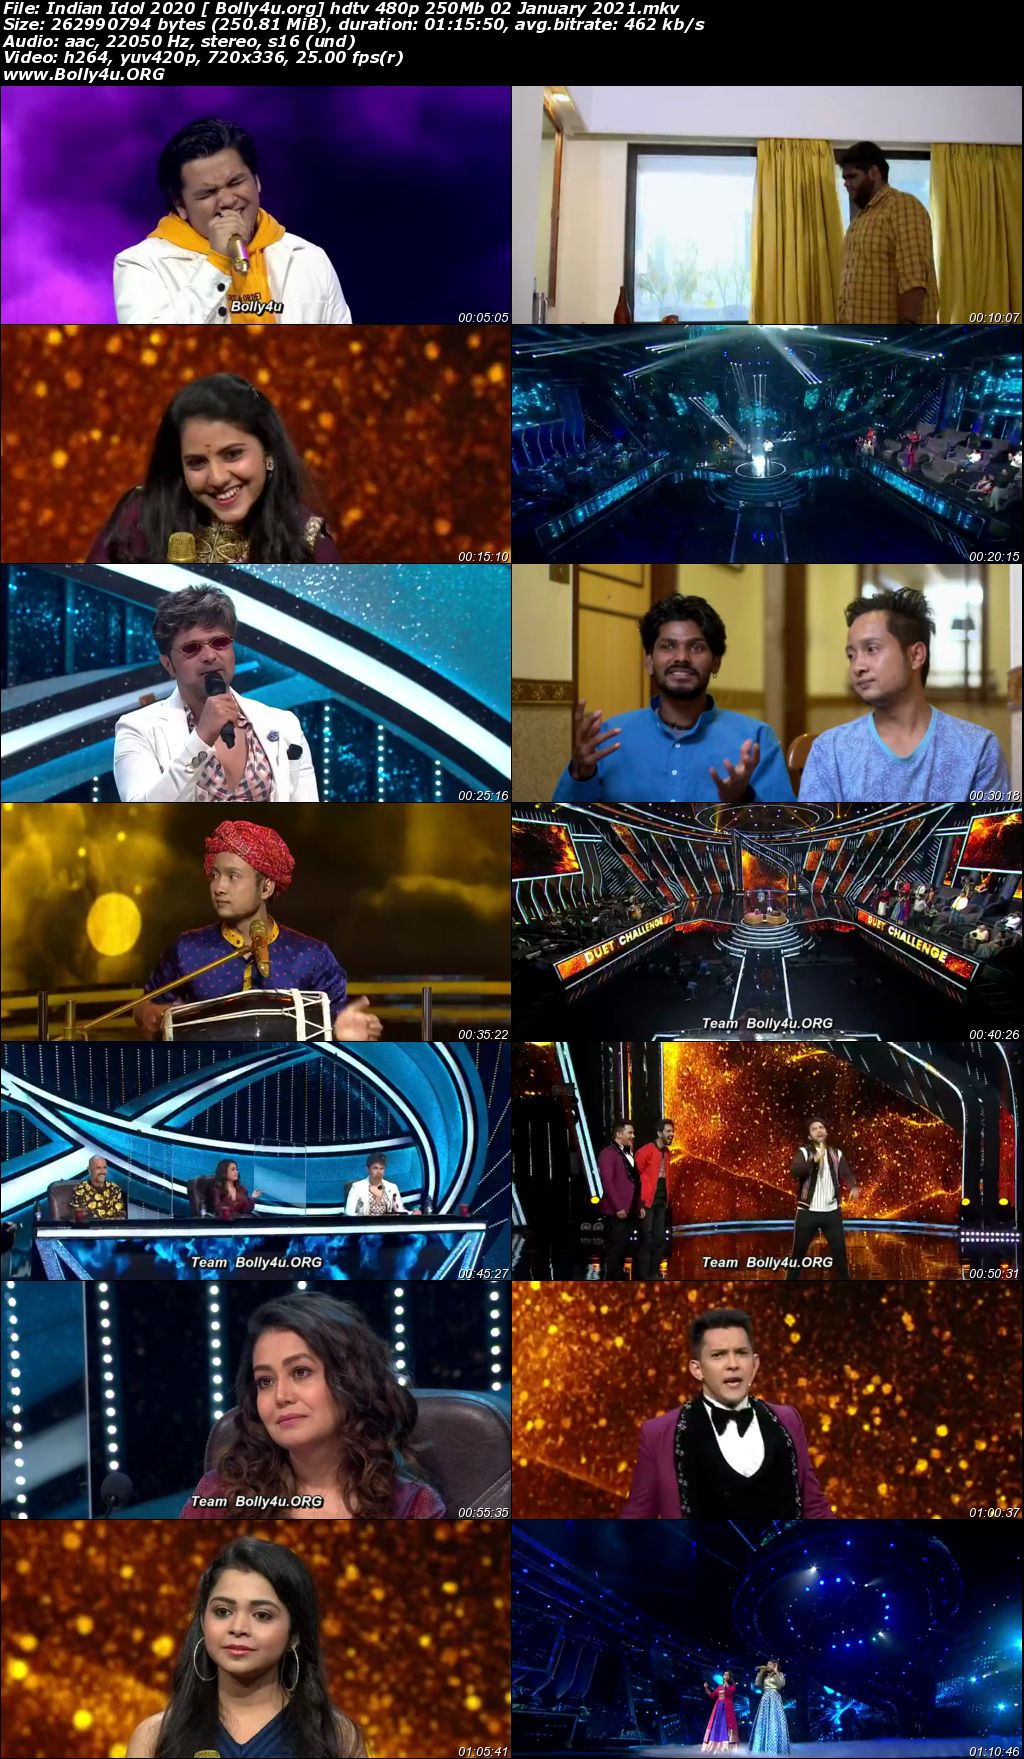 Indian Idol 2020 HDTV 480p 250Mb 02 January 2021 Download